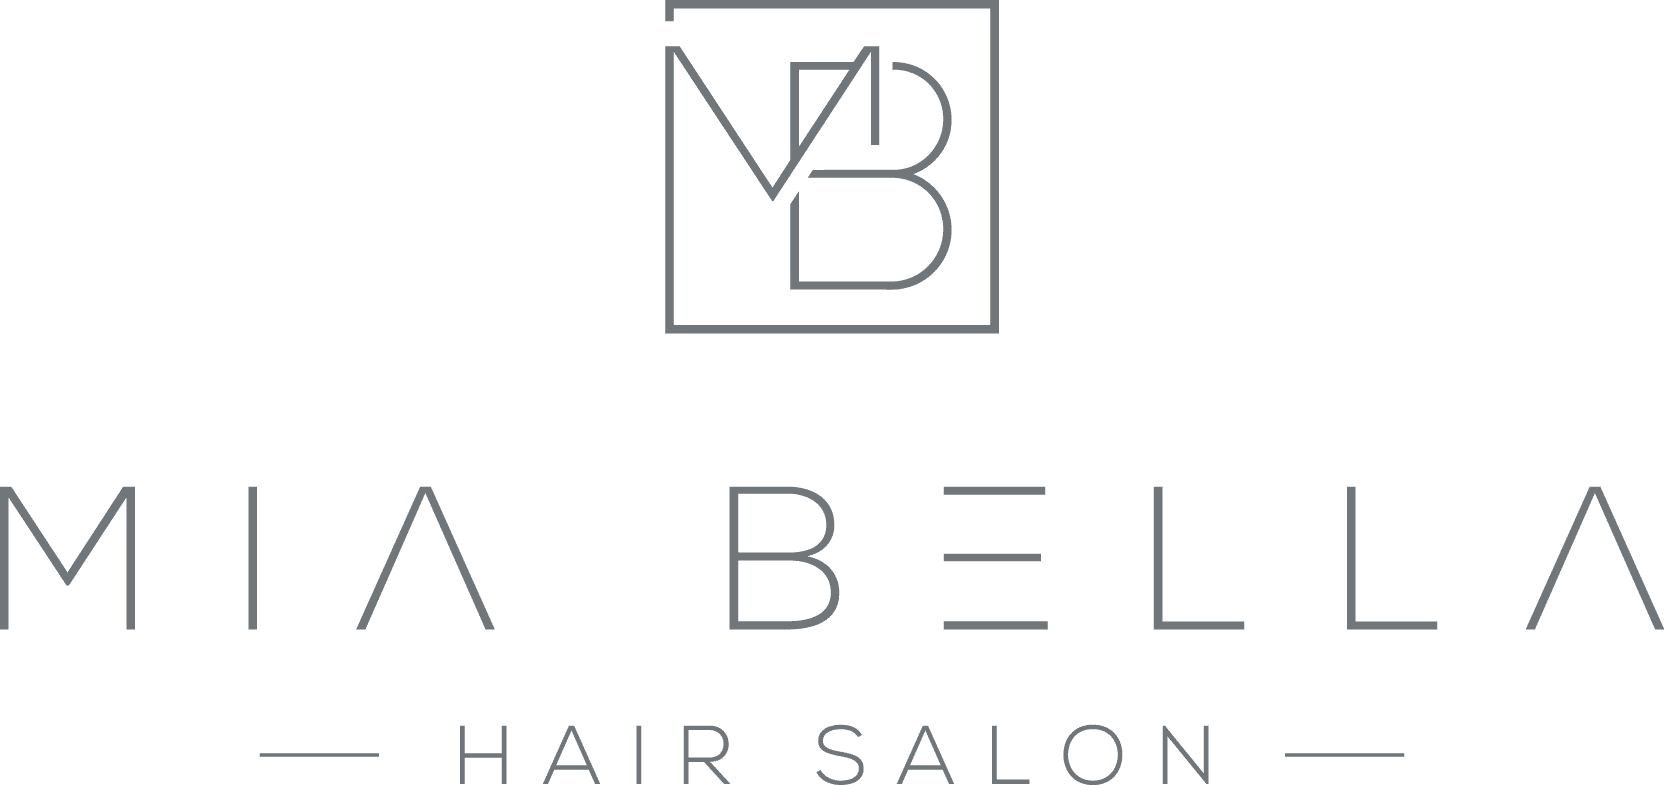 Best Hair Salon Is A Unique Term Used To Define Professional Salon Practices In The City Of Phila ...